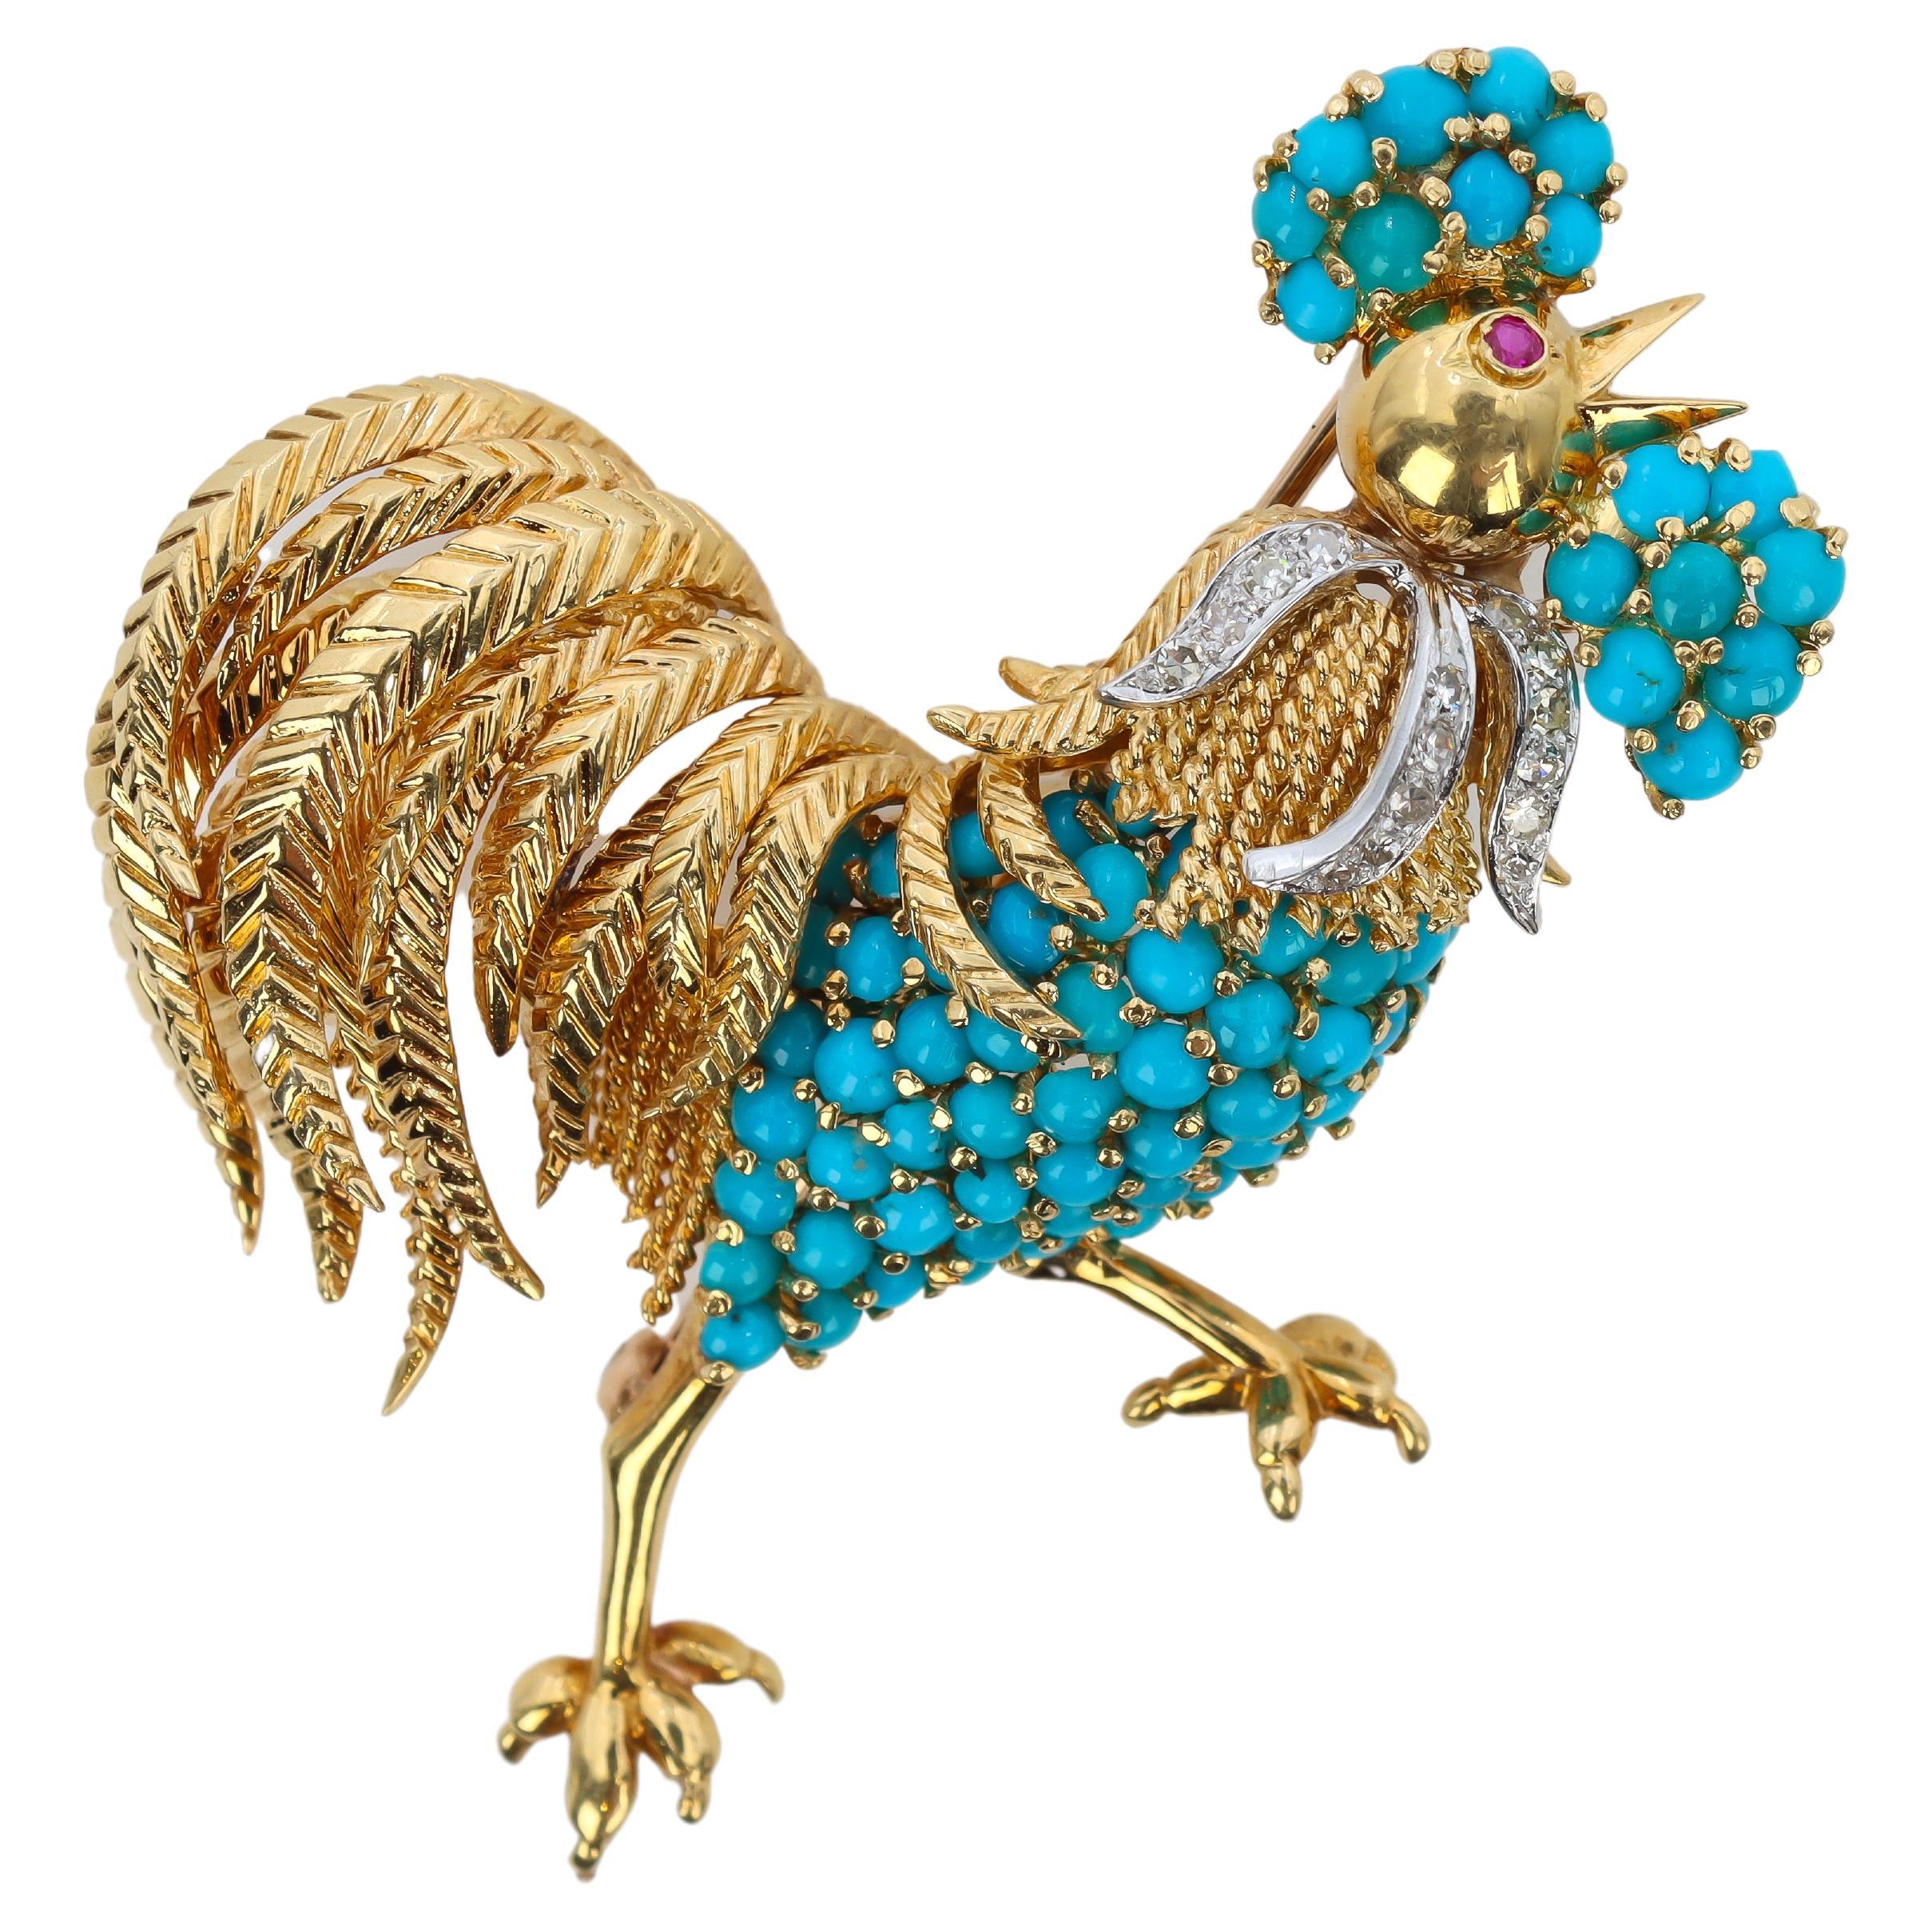 Tiffany & Co. Rare 18K Gold Turquoise and Diamond Chanticleer / Rooster Brooch